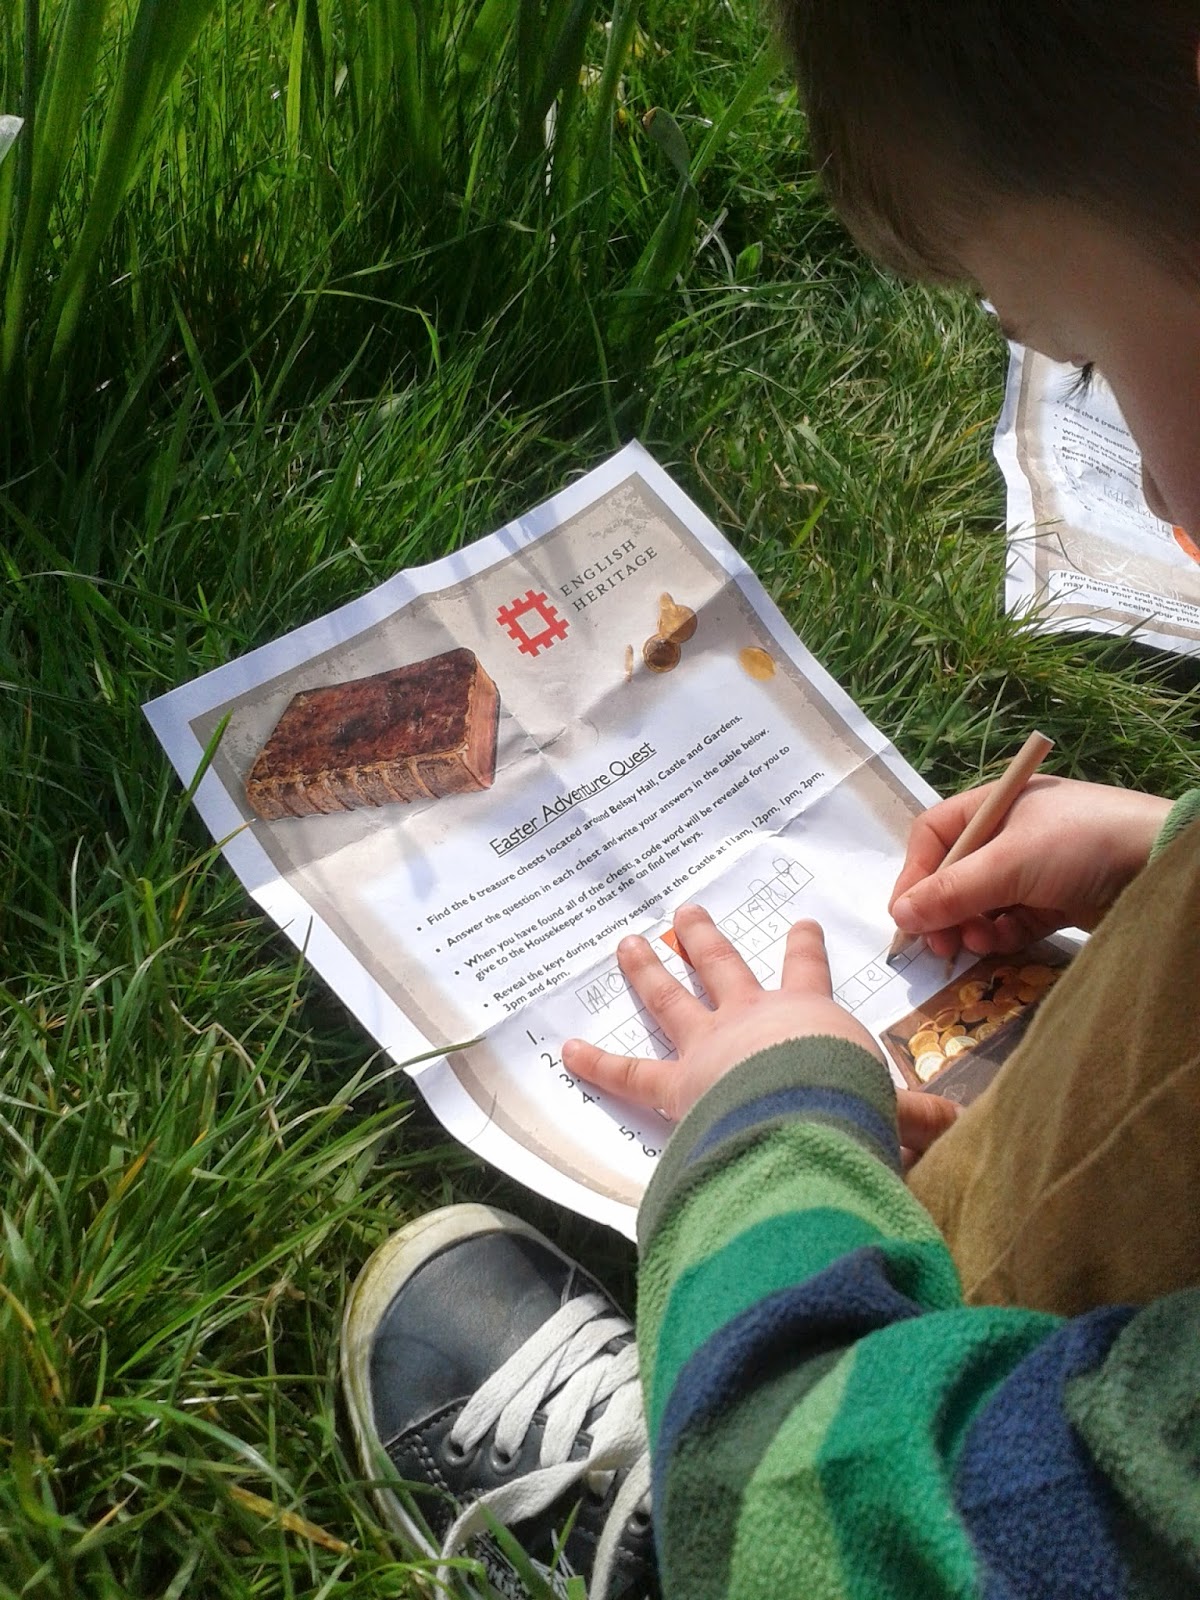 Activities for children at National Trust.